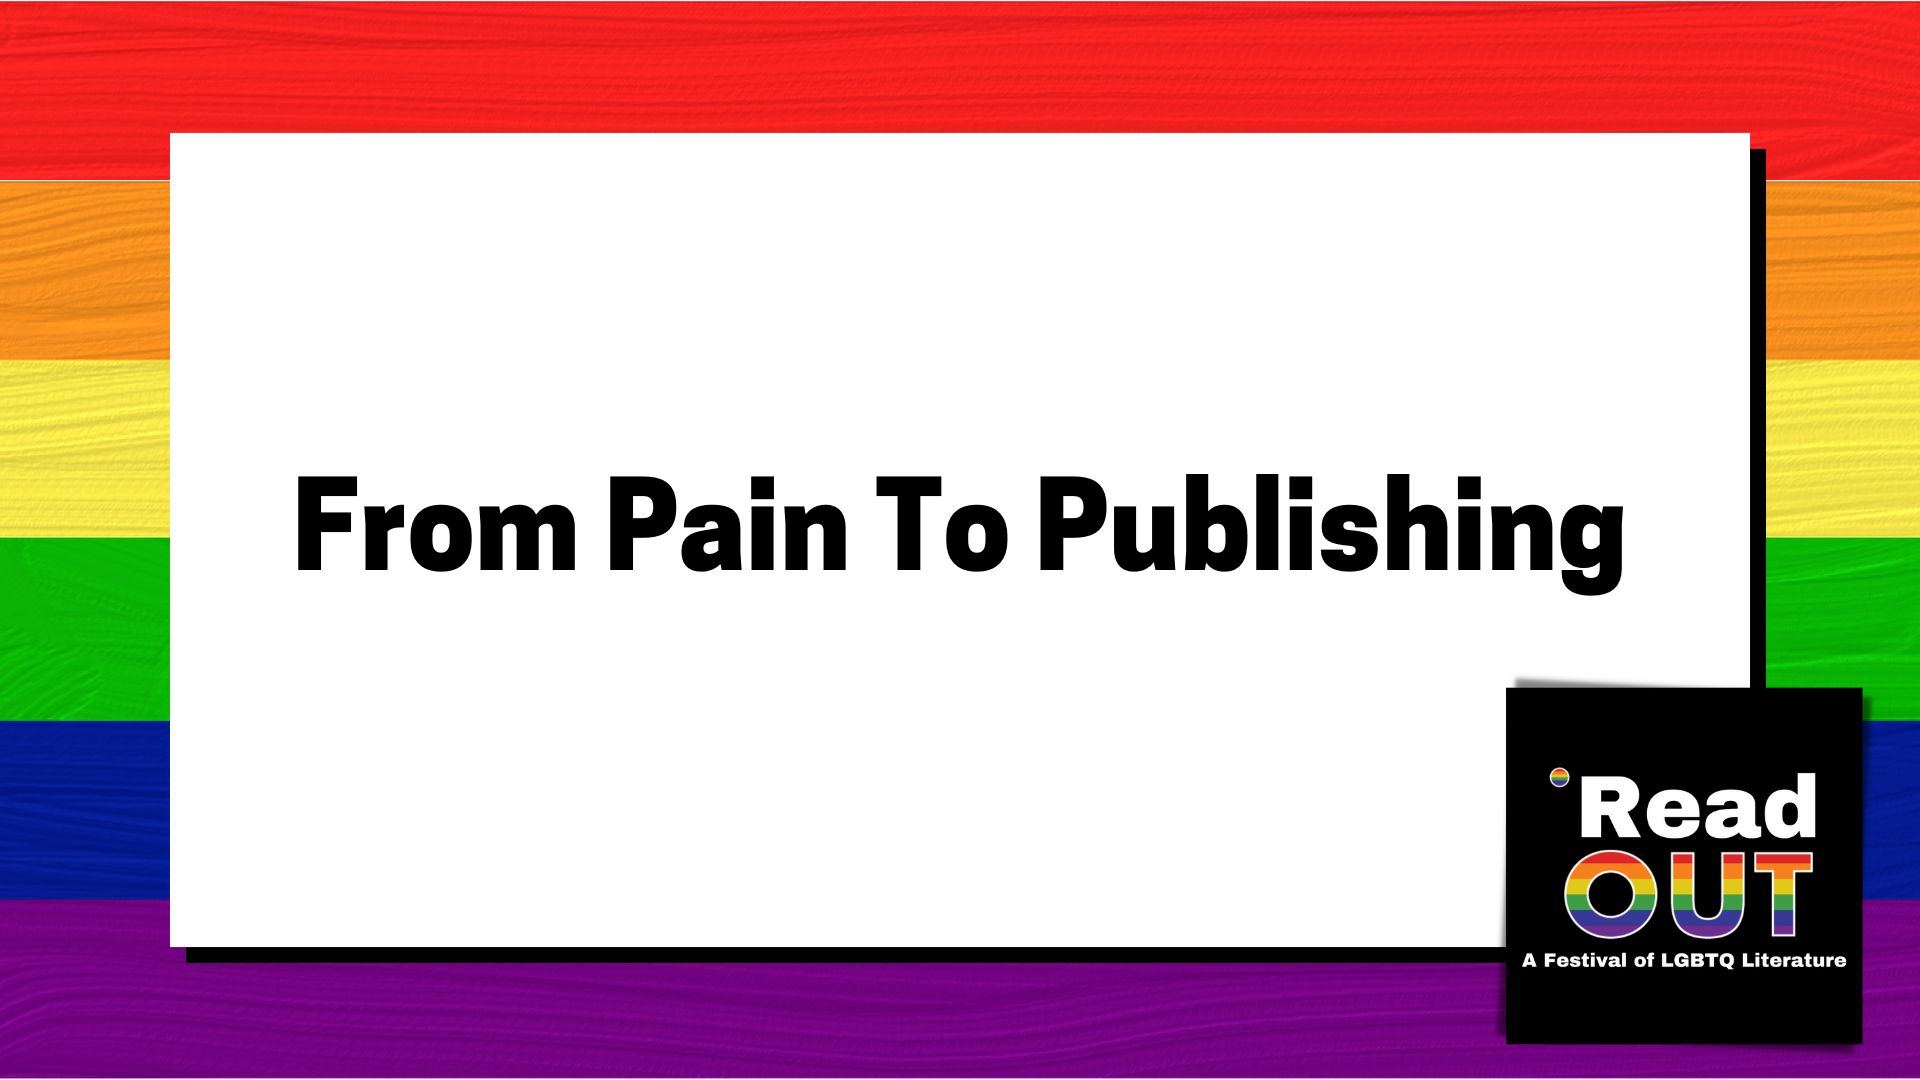 From Pain To Publishing